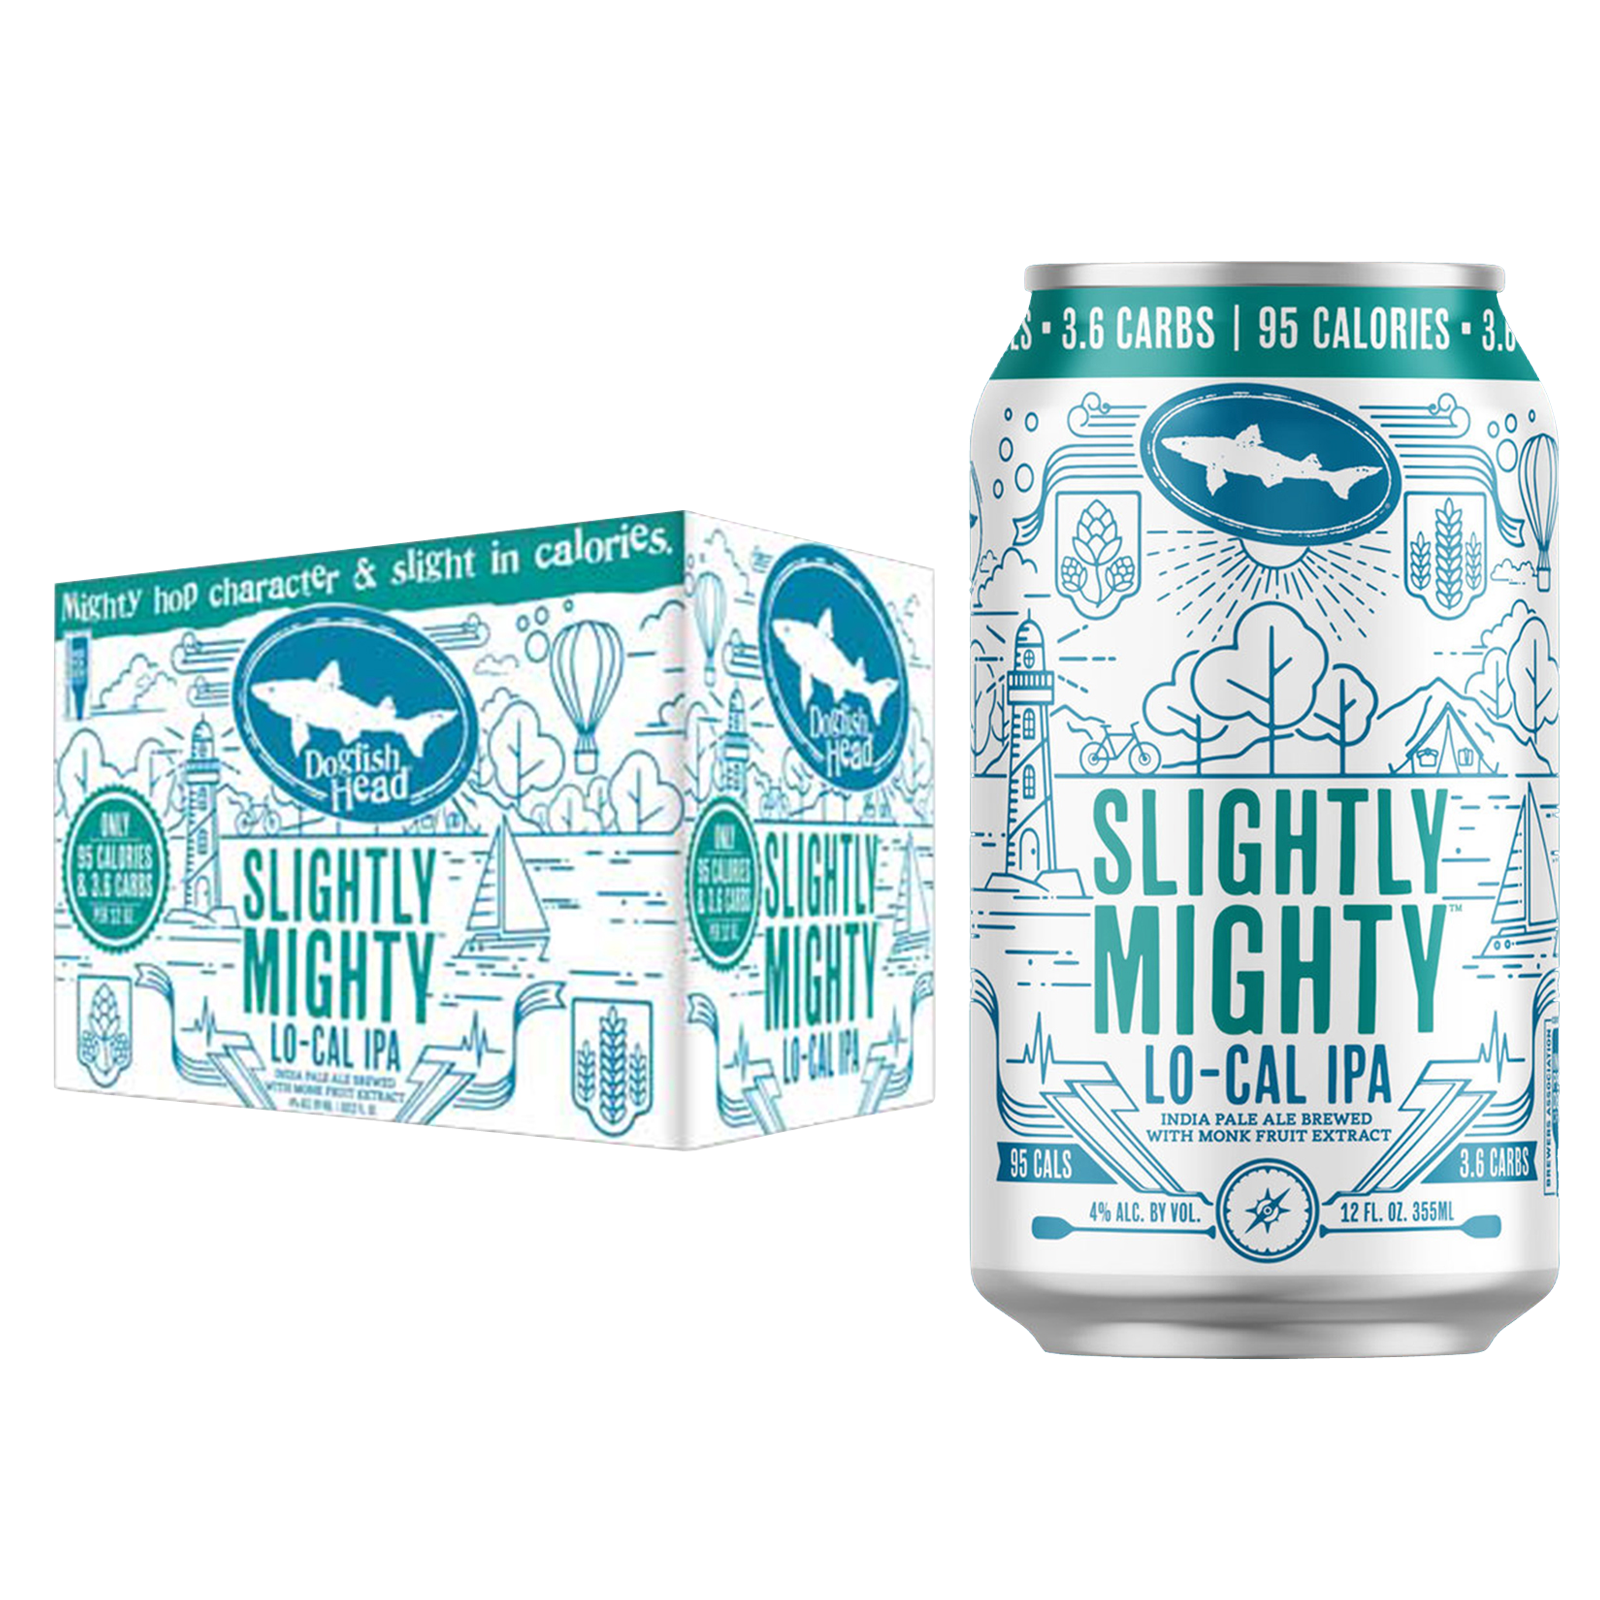 Dogfish Head Slightly Mighty 12pk 12oz Can 4.0% ABV